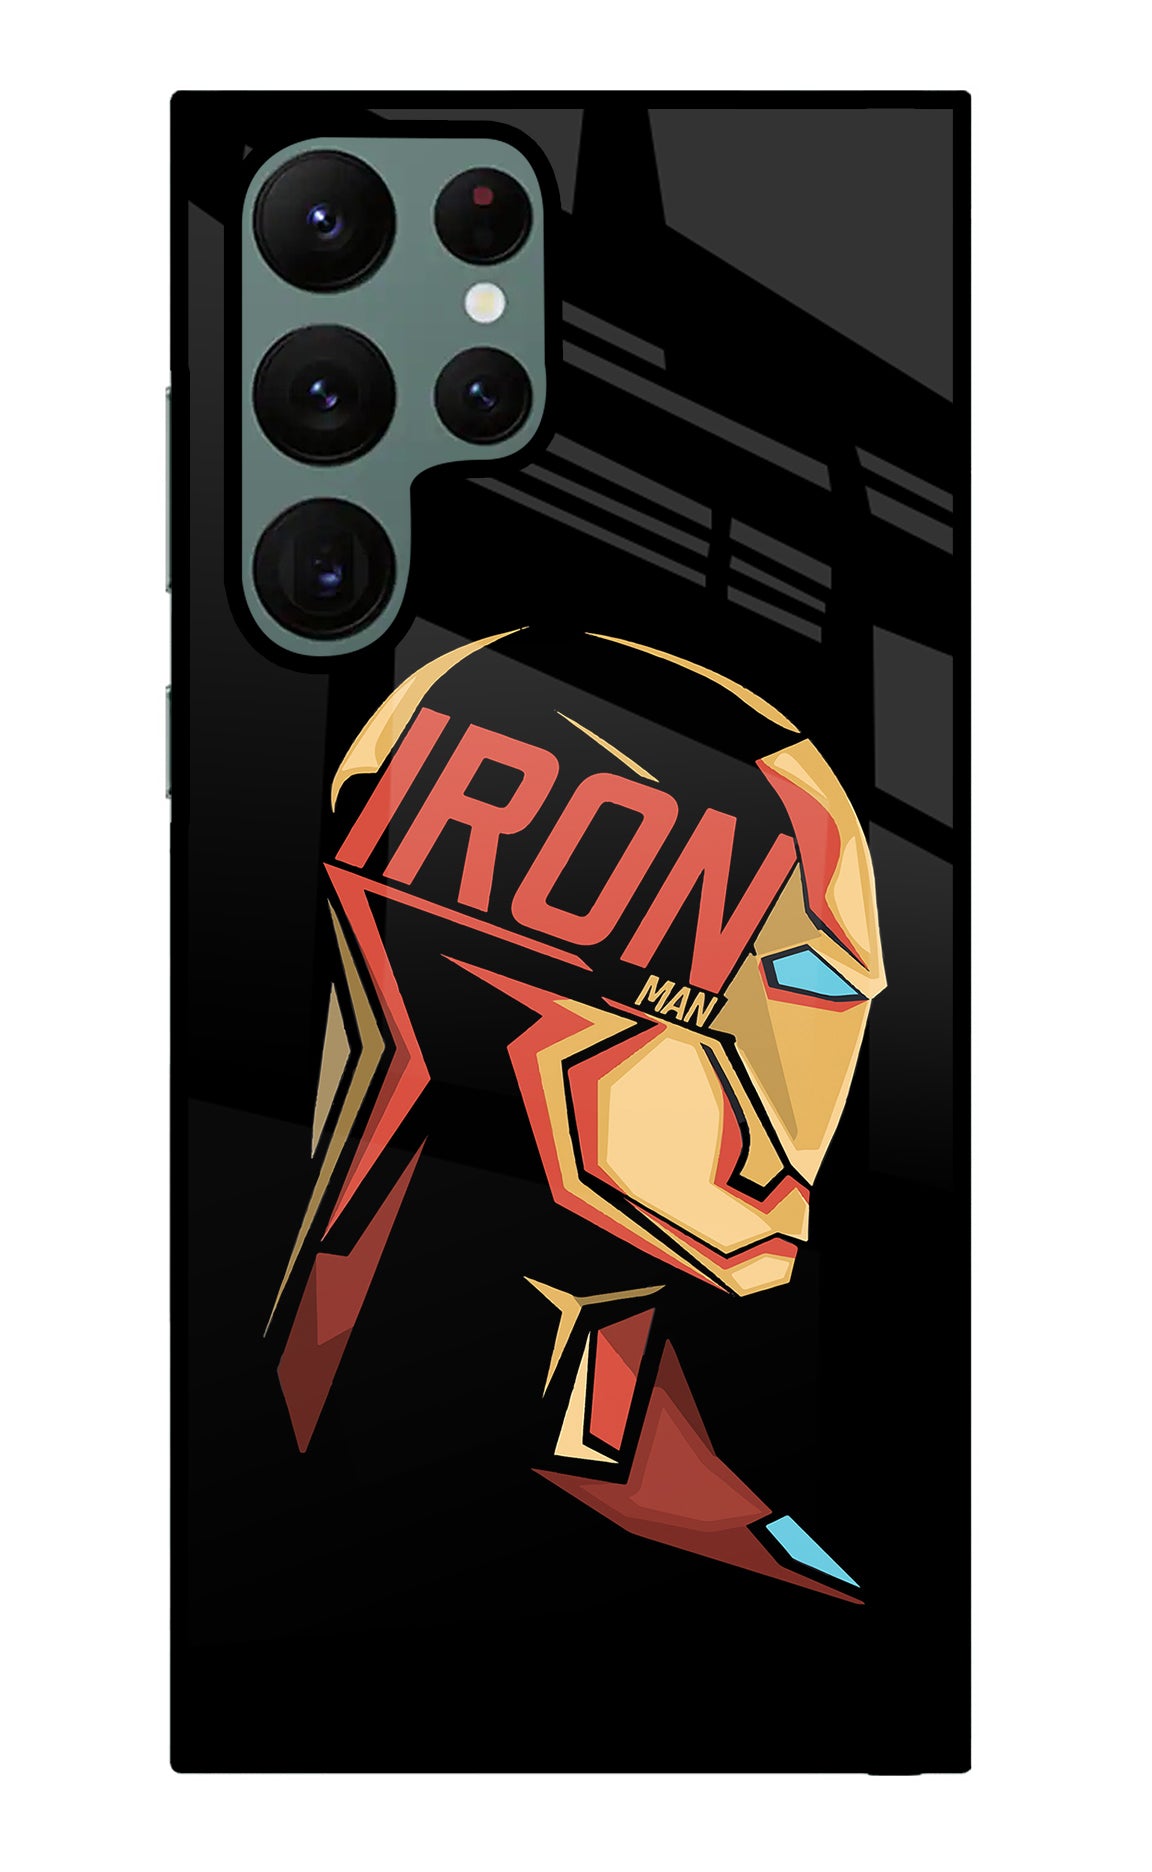 IronMan Samsung S22 Ultra Back Cover